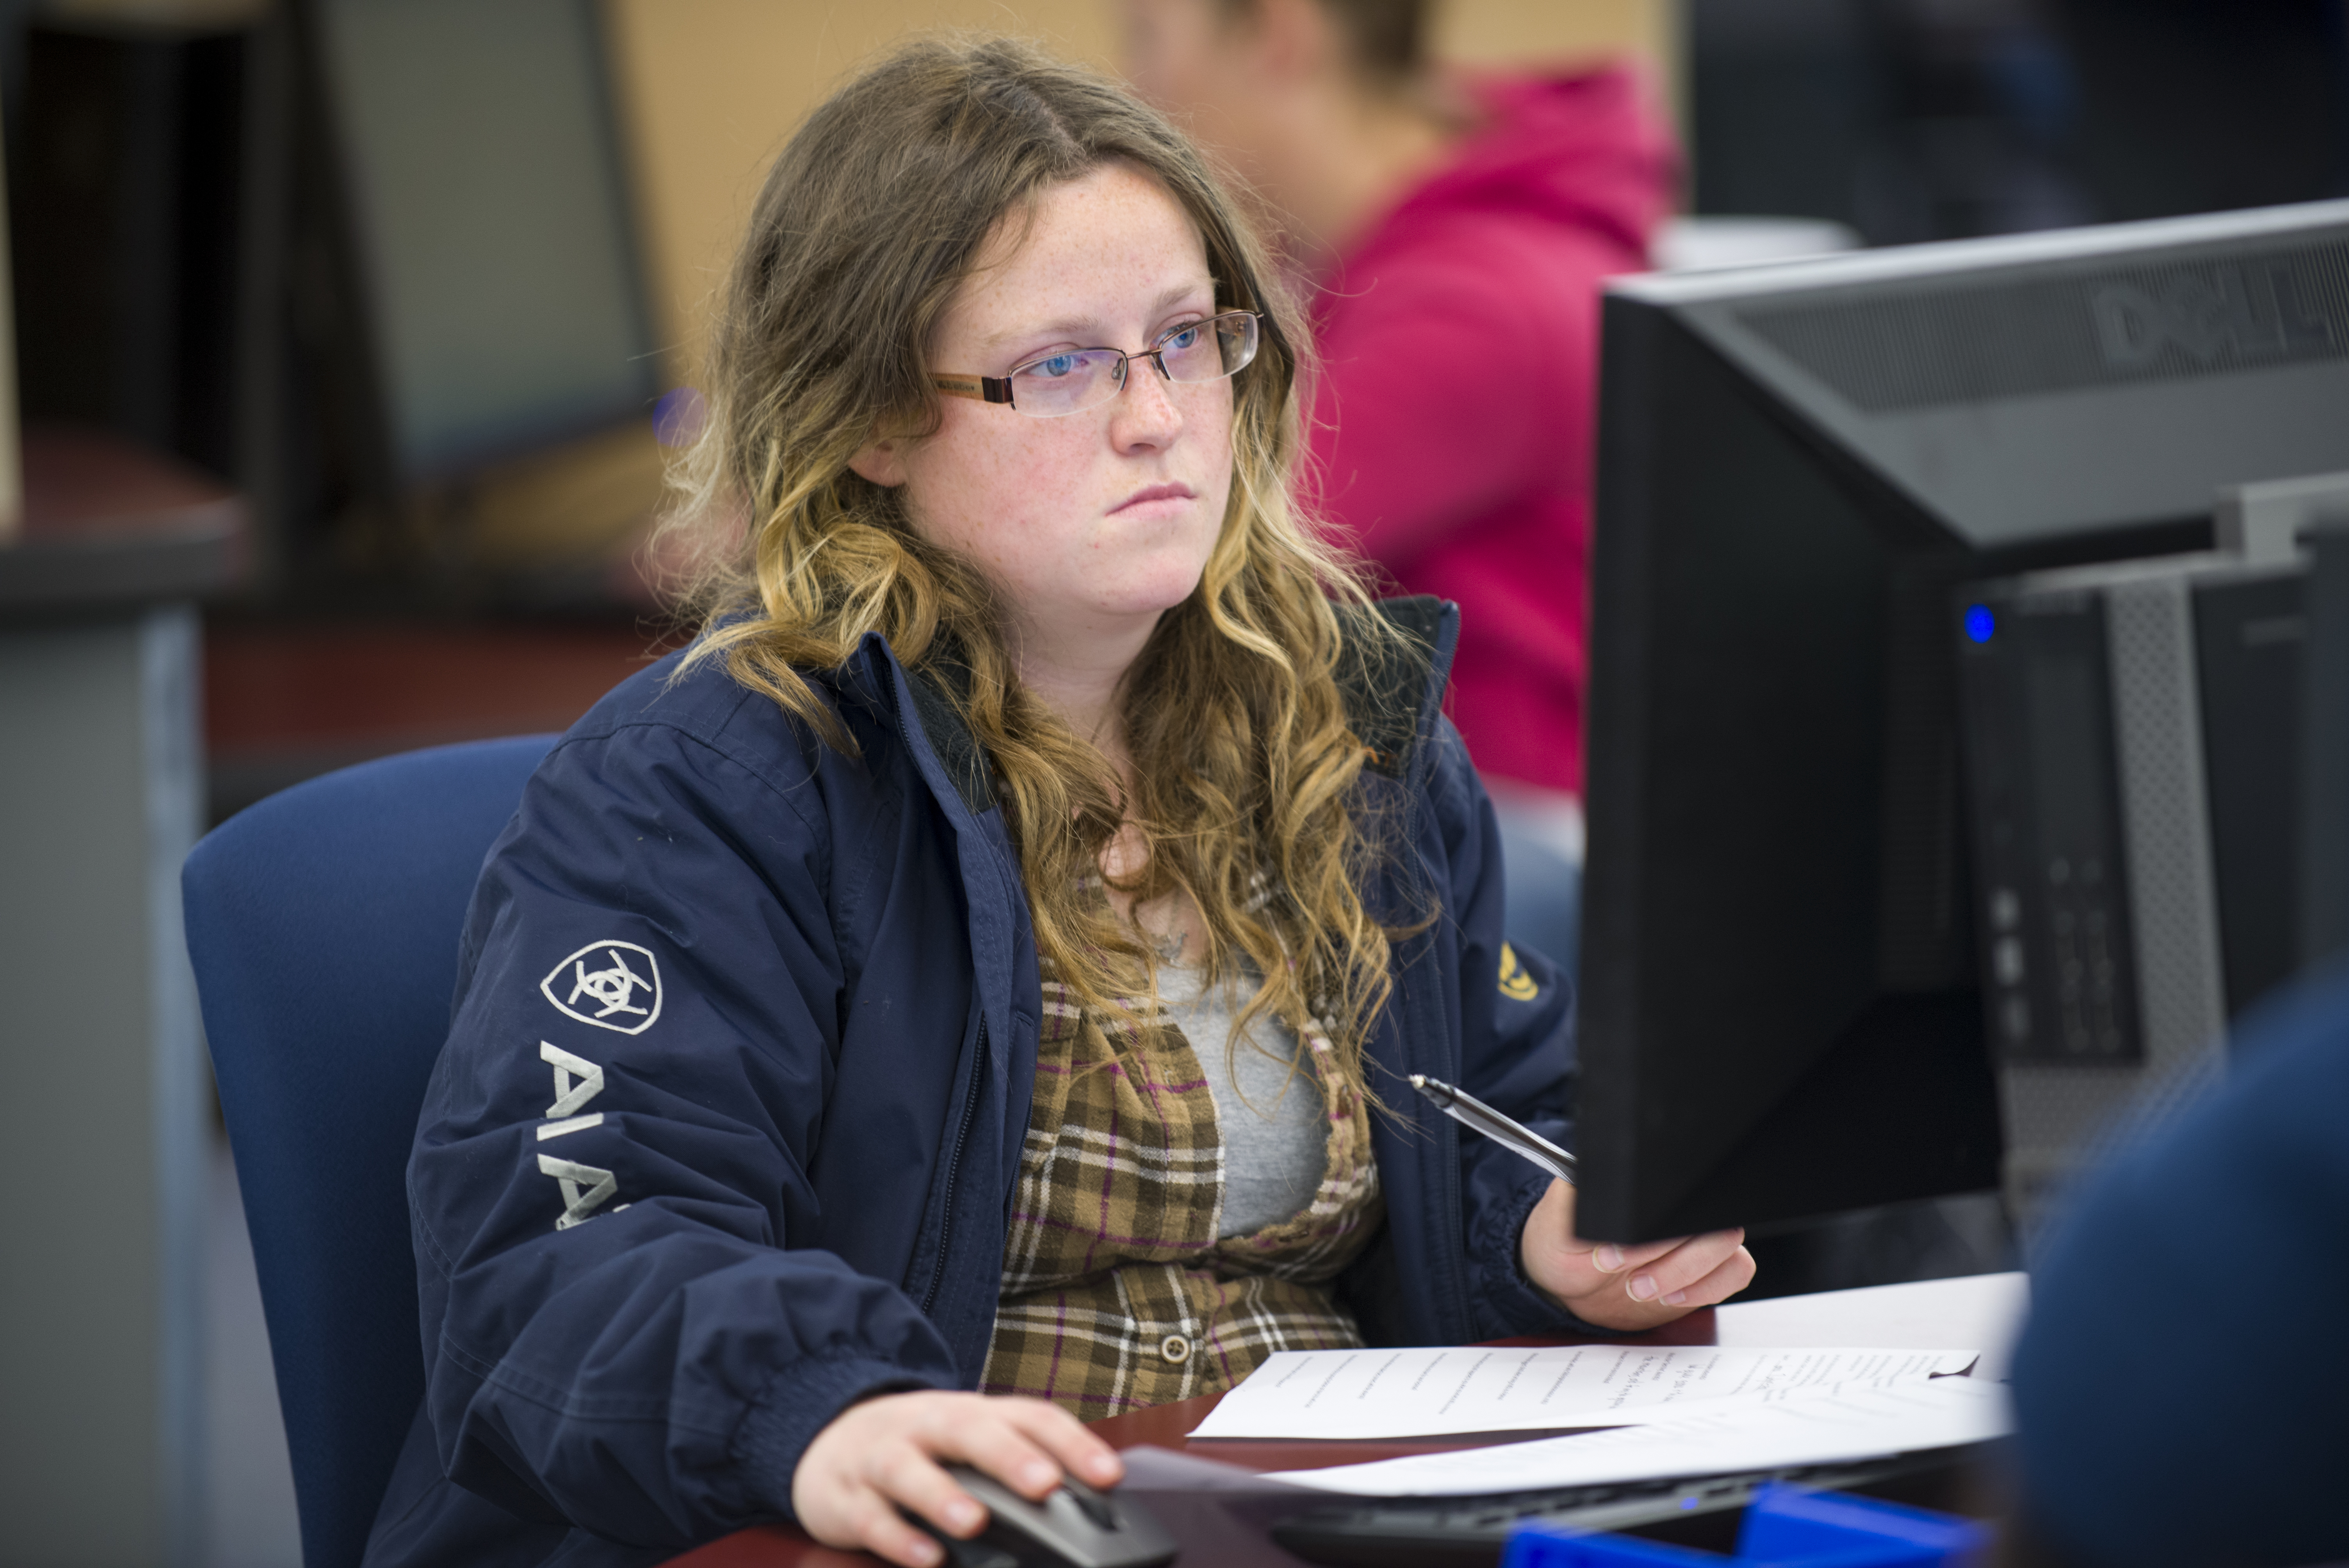 A picture of a student on computer